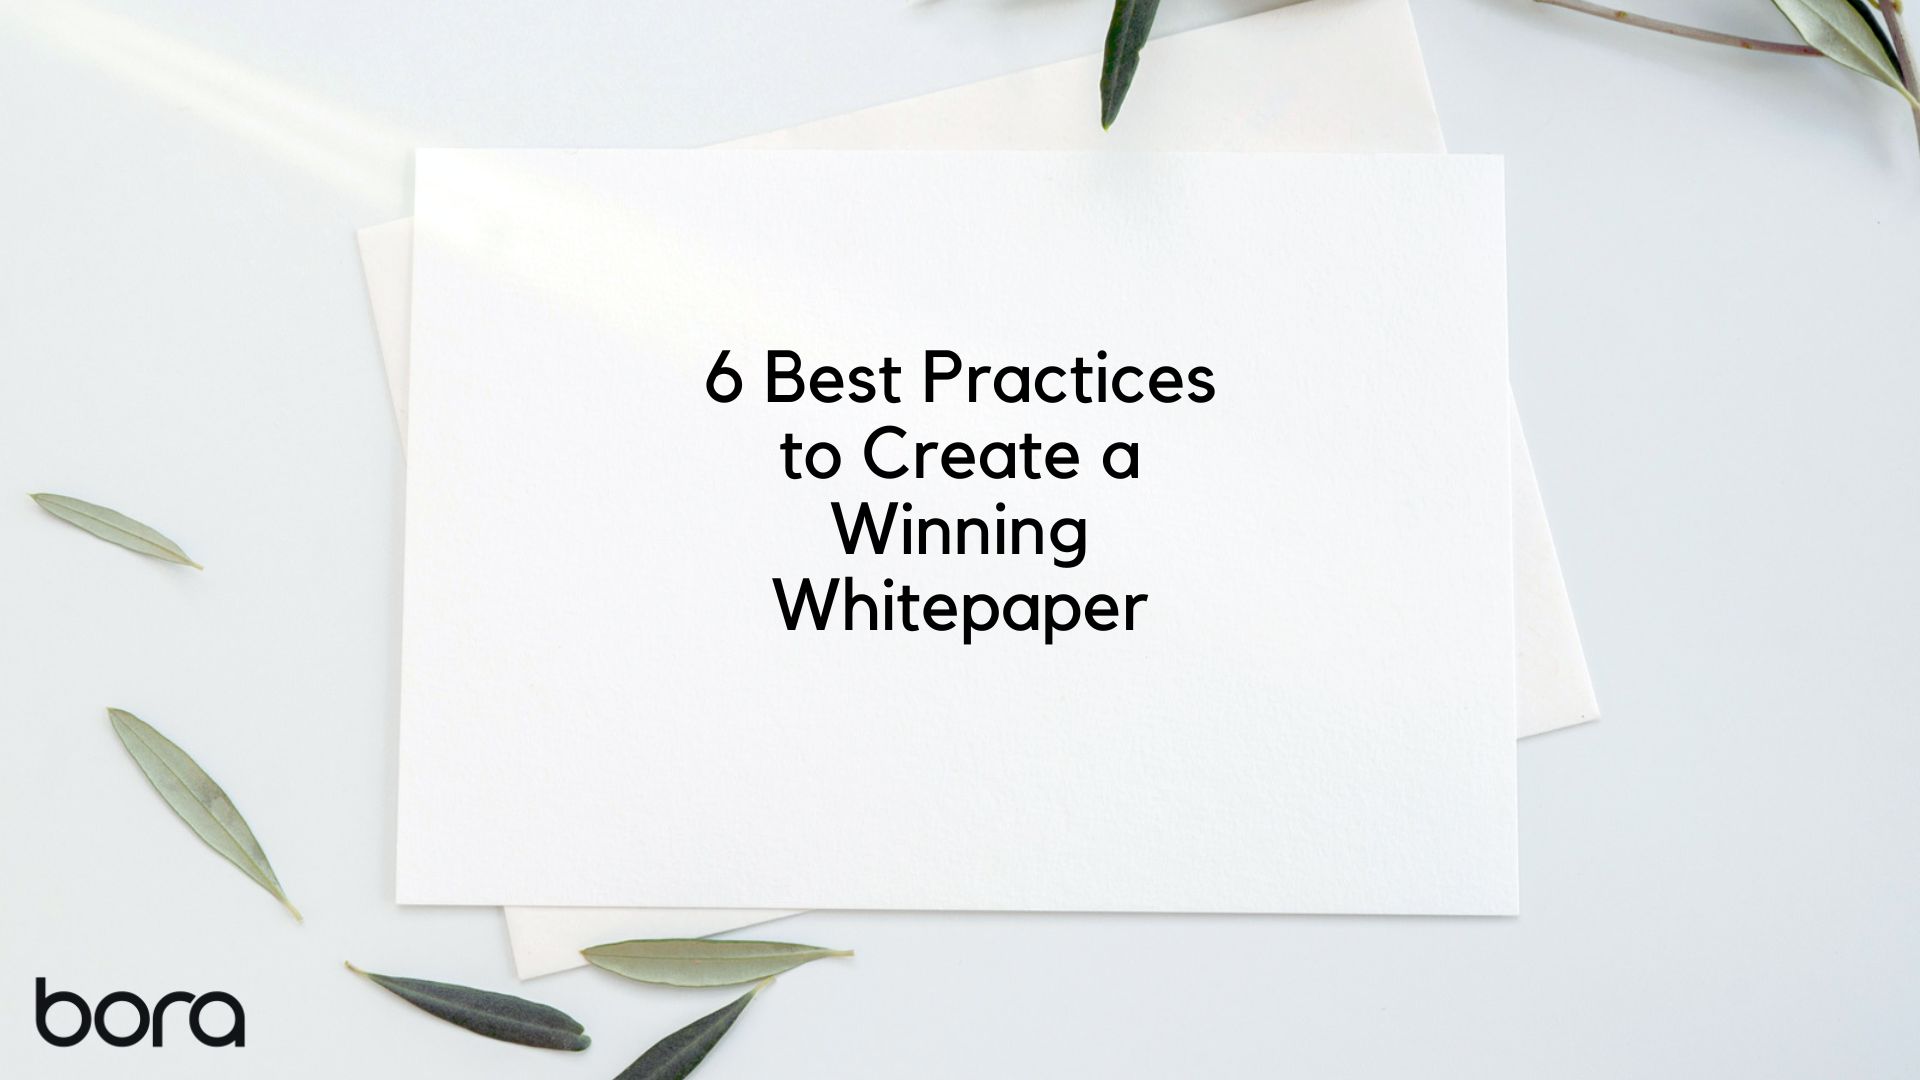 6 Best Practices to Create a Winning Whitepaper